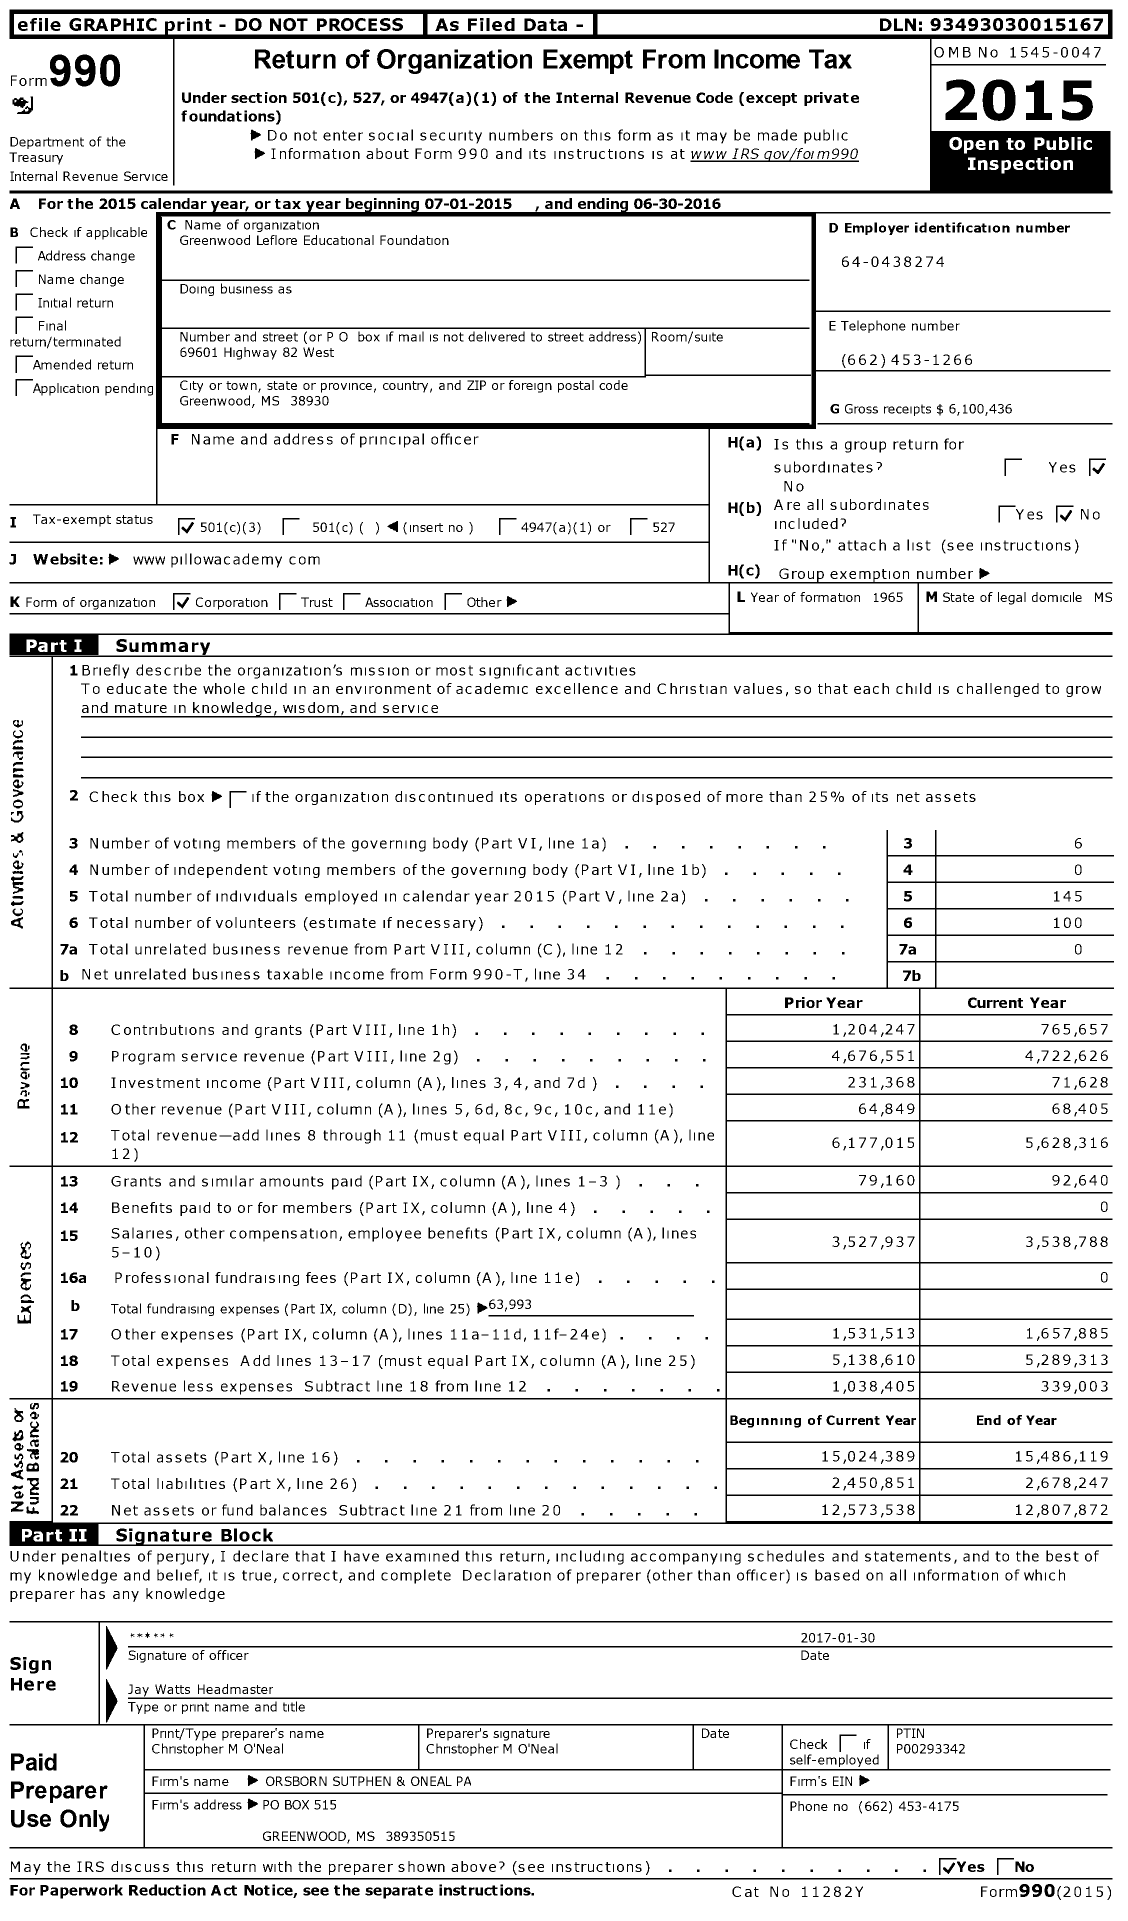 Image of first page of 2015 Form 990 for Greenwood Leflore Educational Foundation